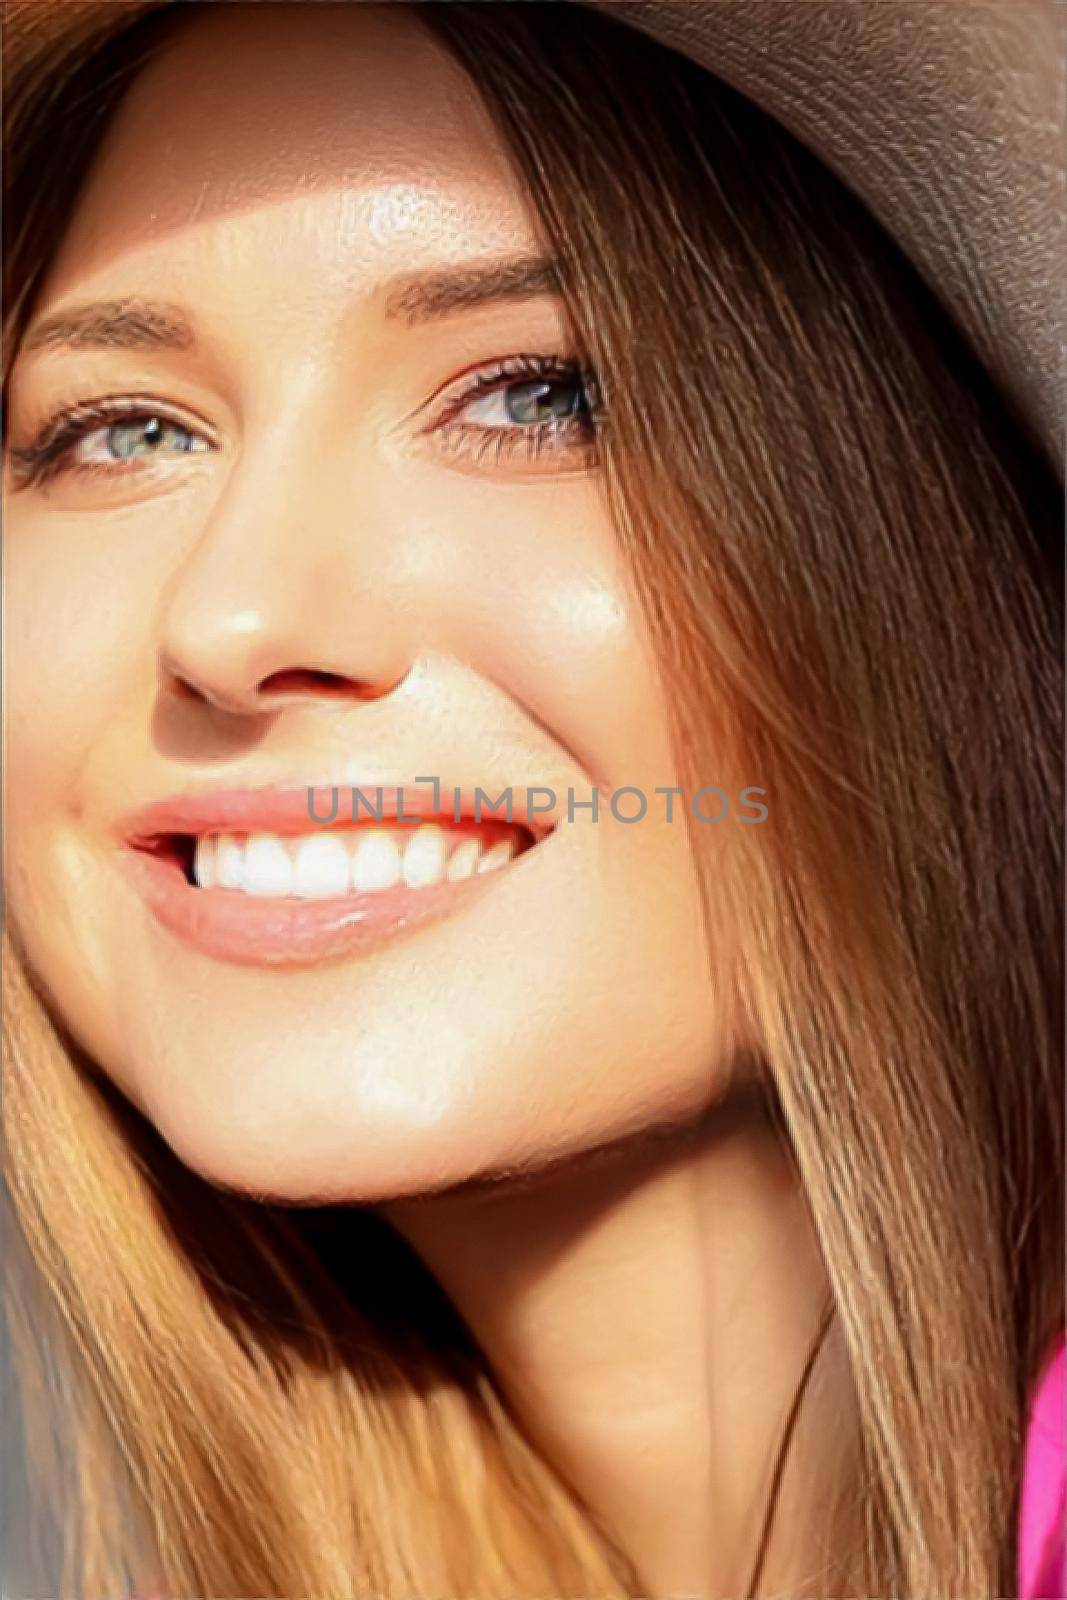 Fashion, travel and beauty face portrait of young woman, happy smiling model wearing beach sun hat in summer, head accessory and style by Anneleven